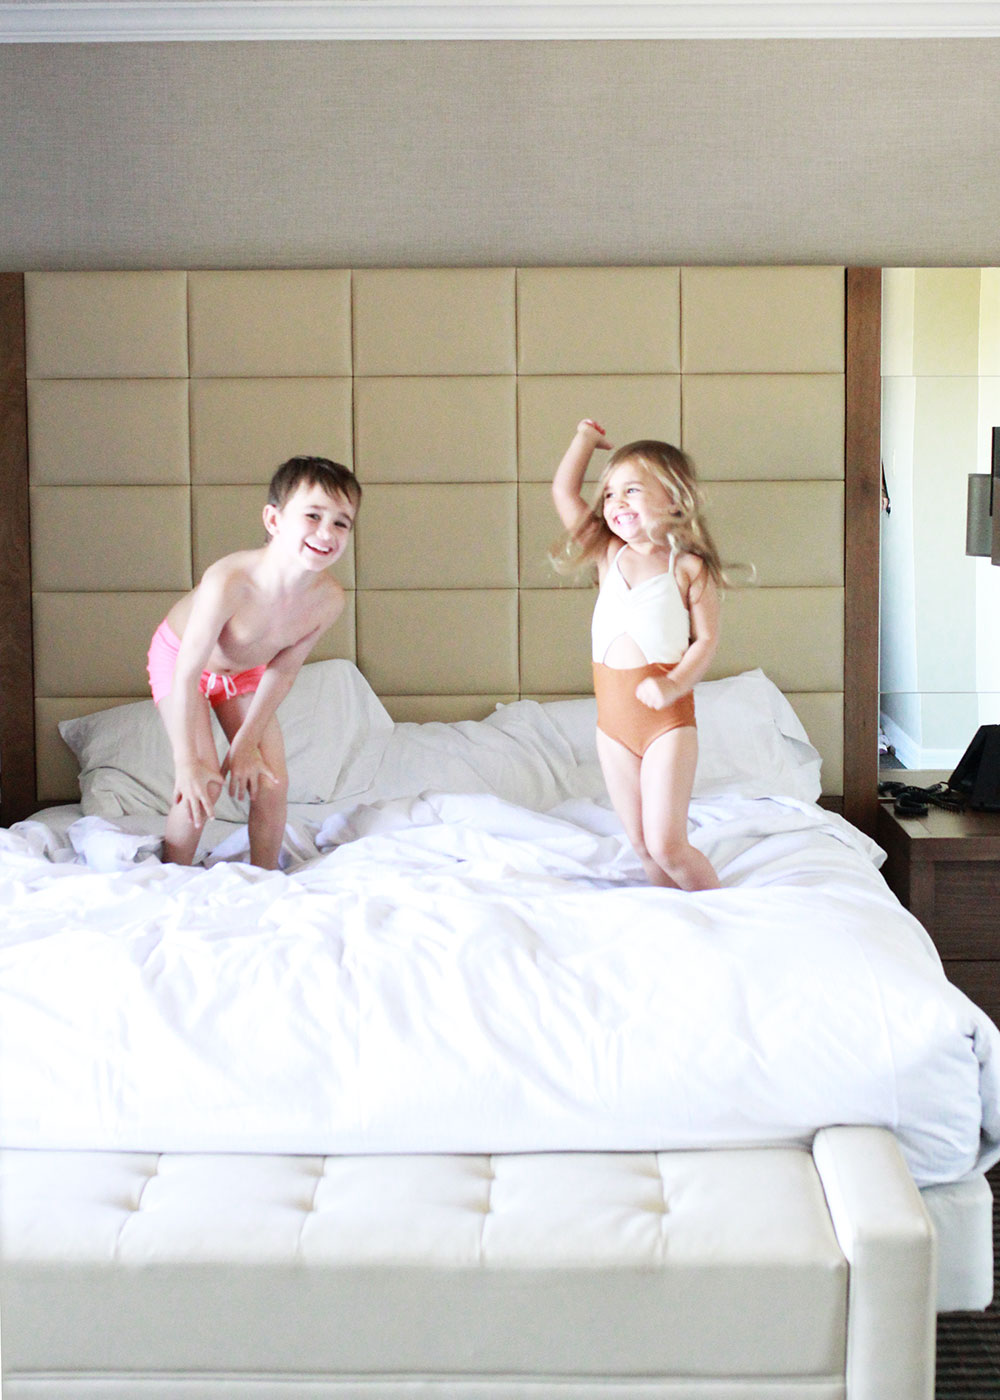 monkeys jumping on the hotel bed | thelovedesignedlife.com